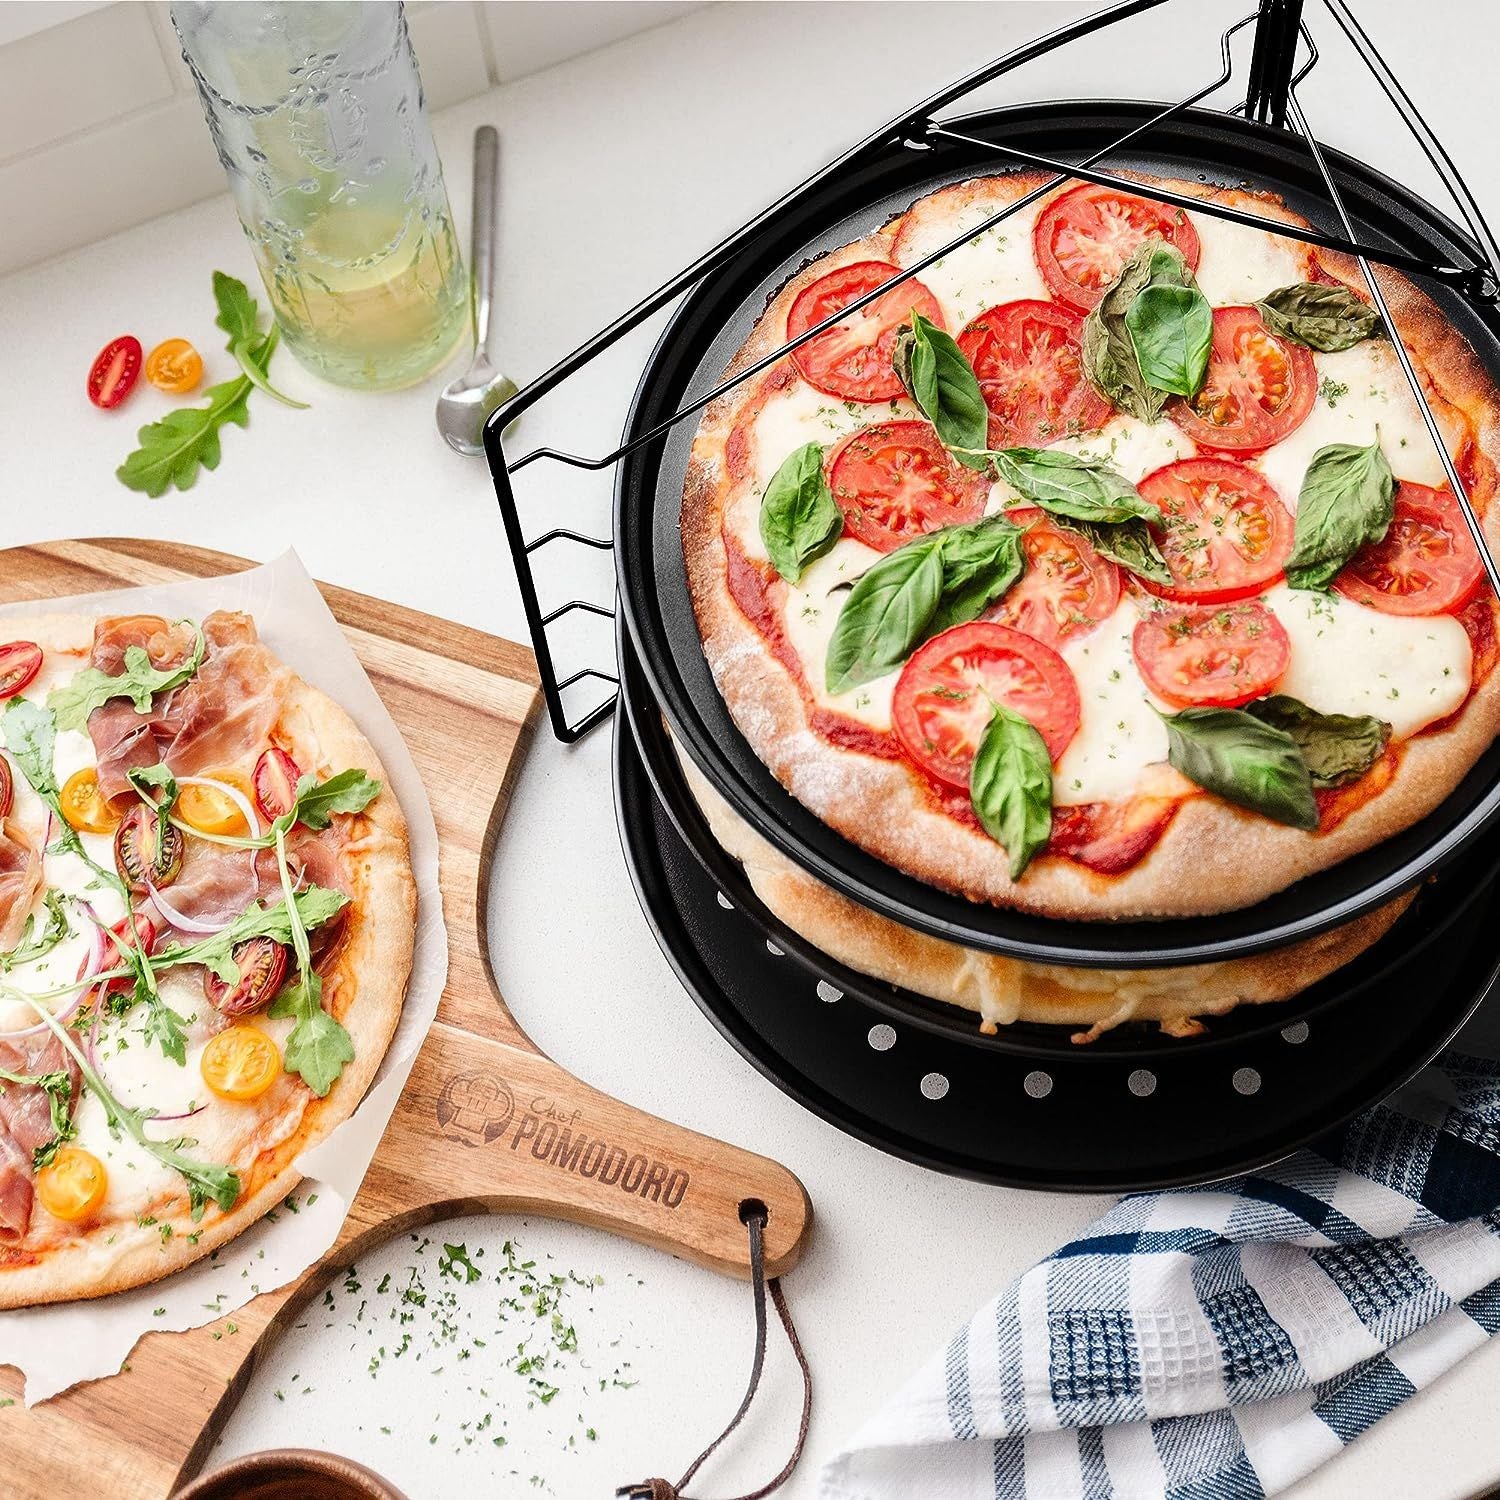 Perfect Pan Pizza – A Couple Cooks